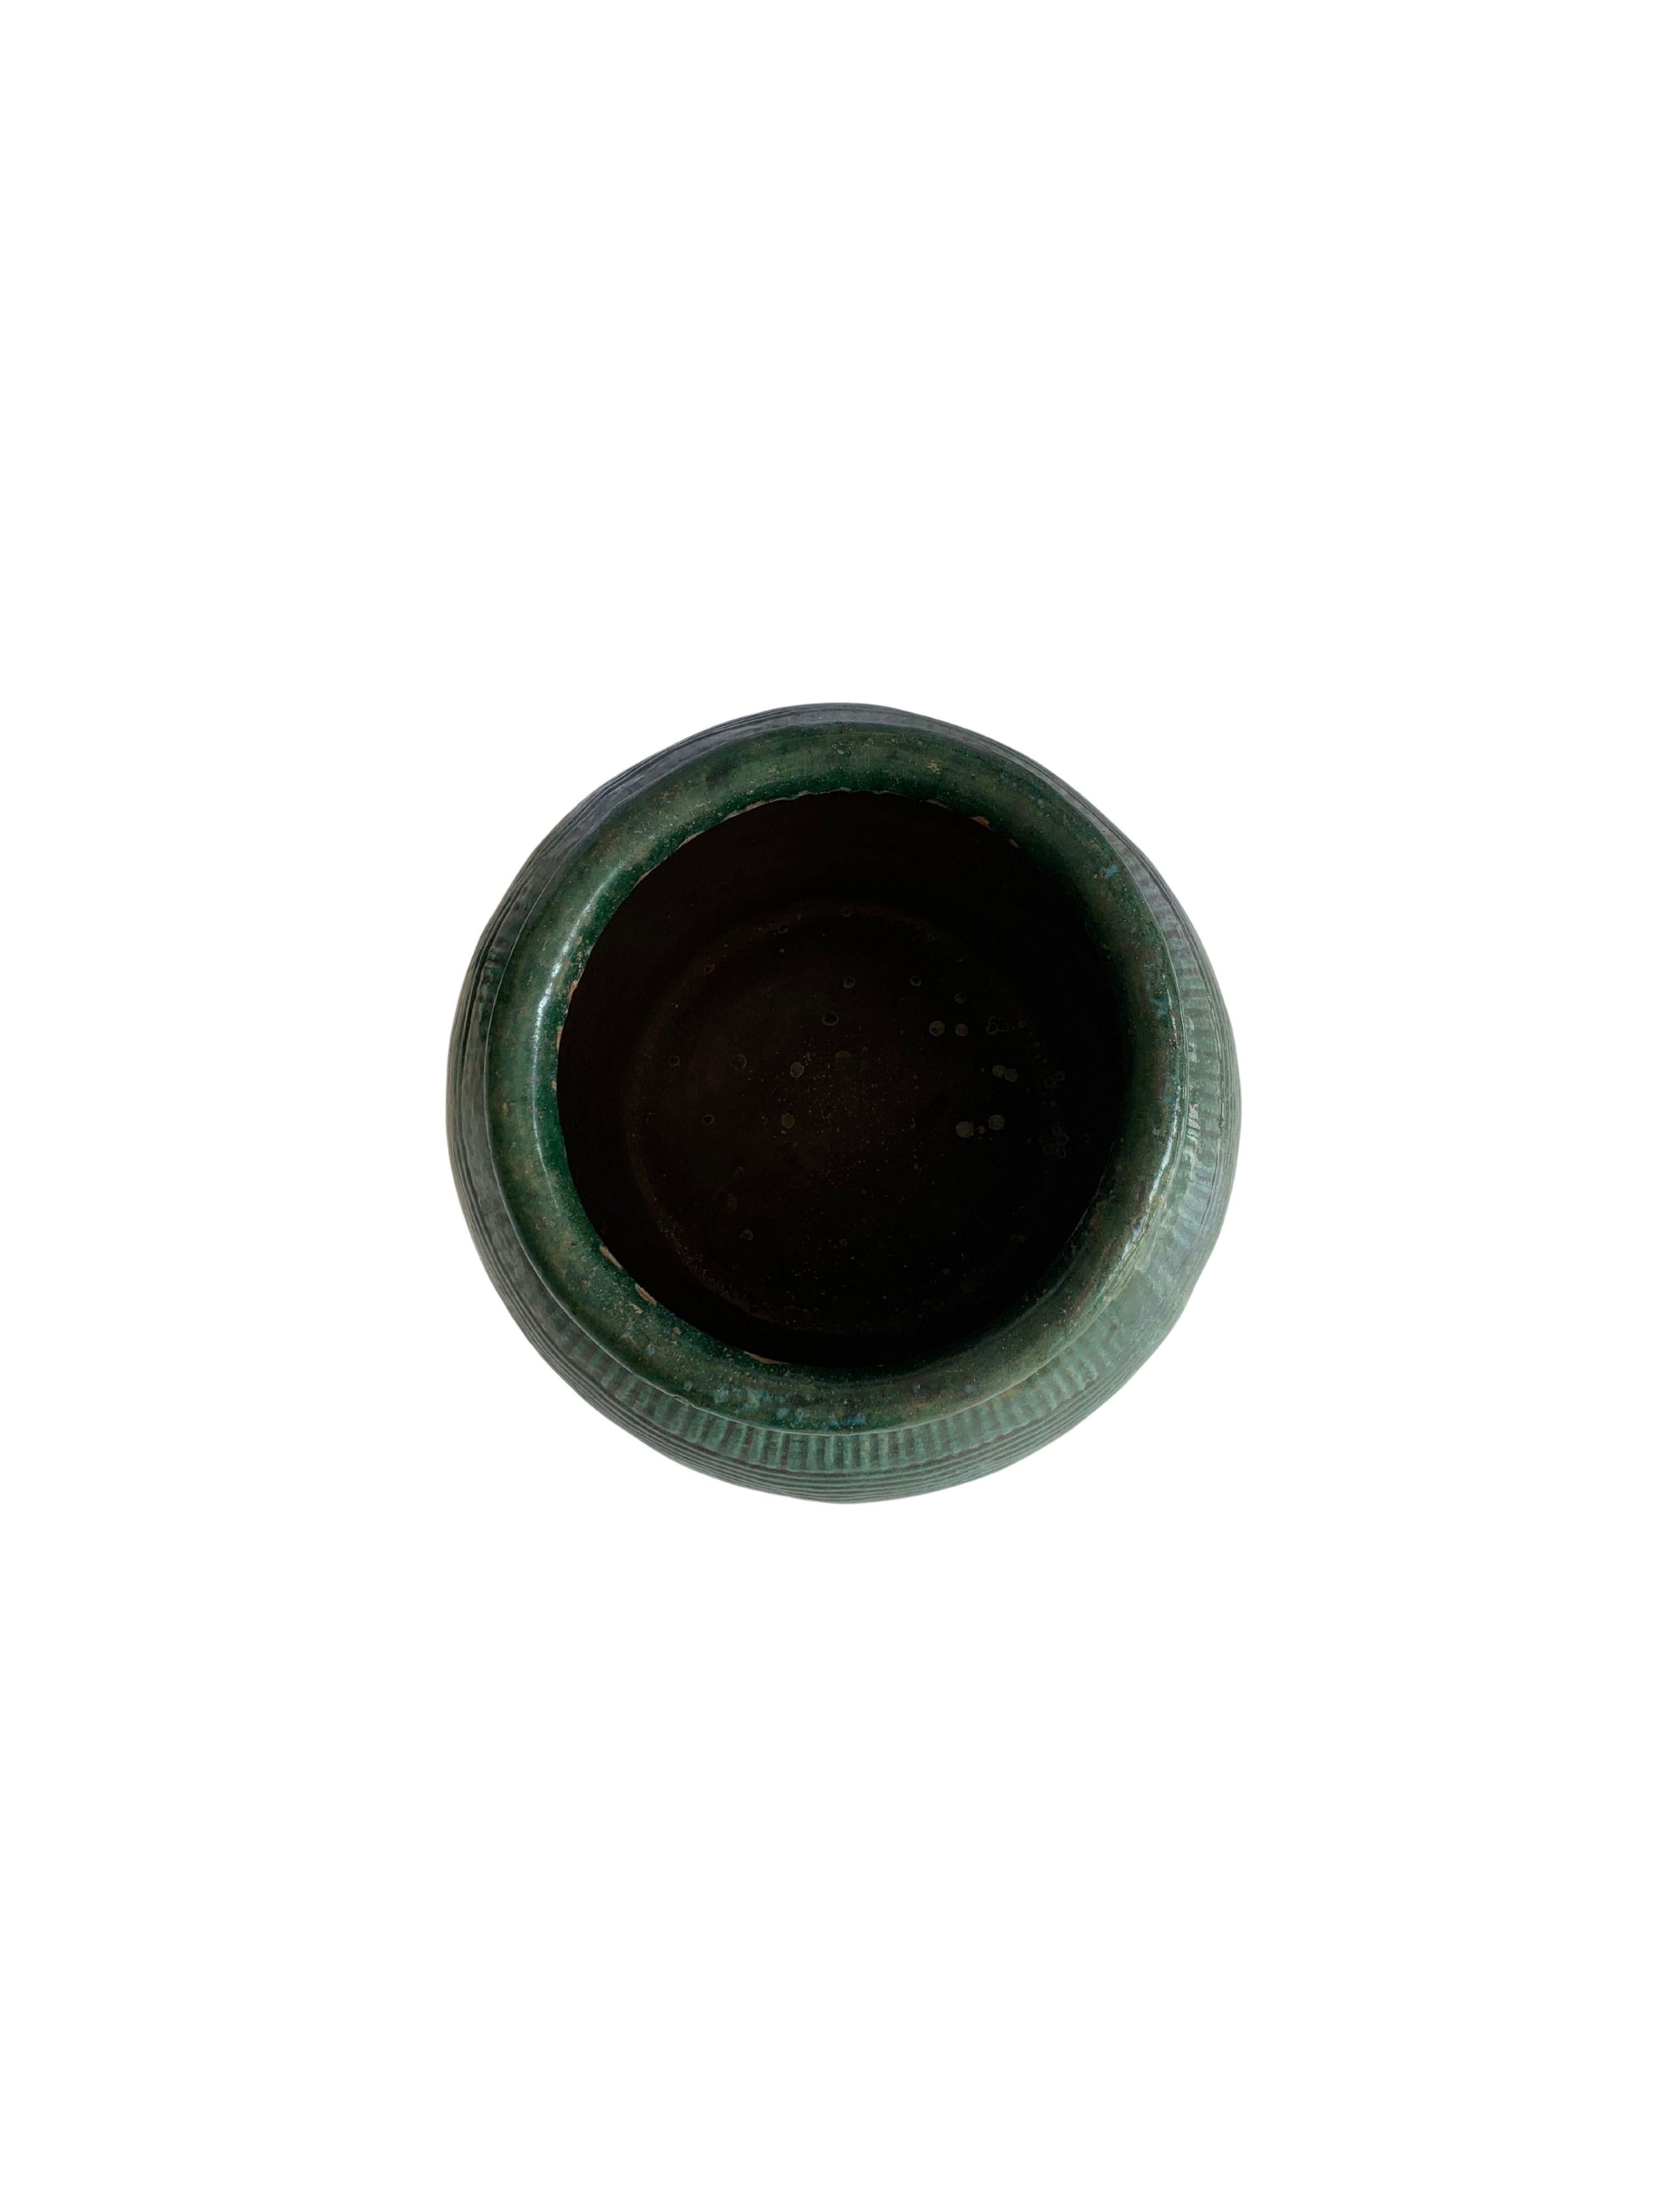 Antique Chinese Green Glazed Ceramic Soy Sauce Jar, C. 1900 In Good Condition In Jimbaran, Bali